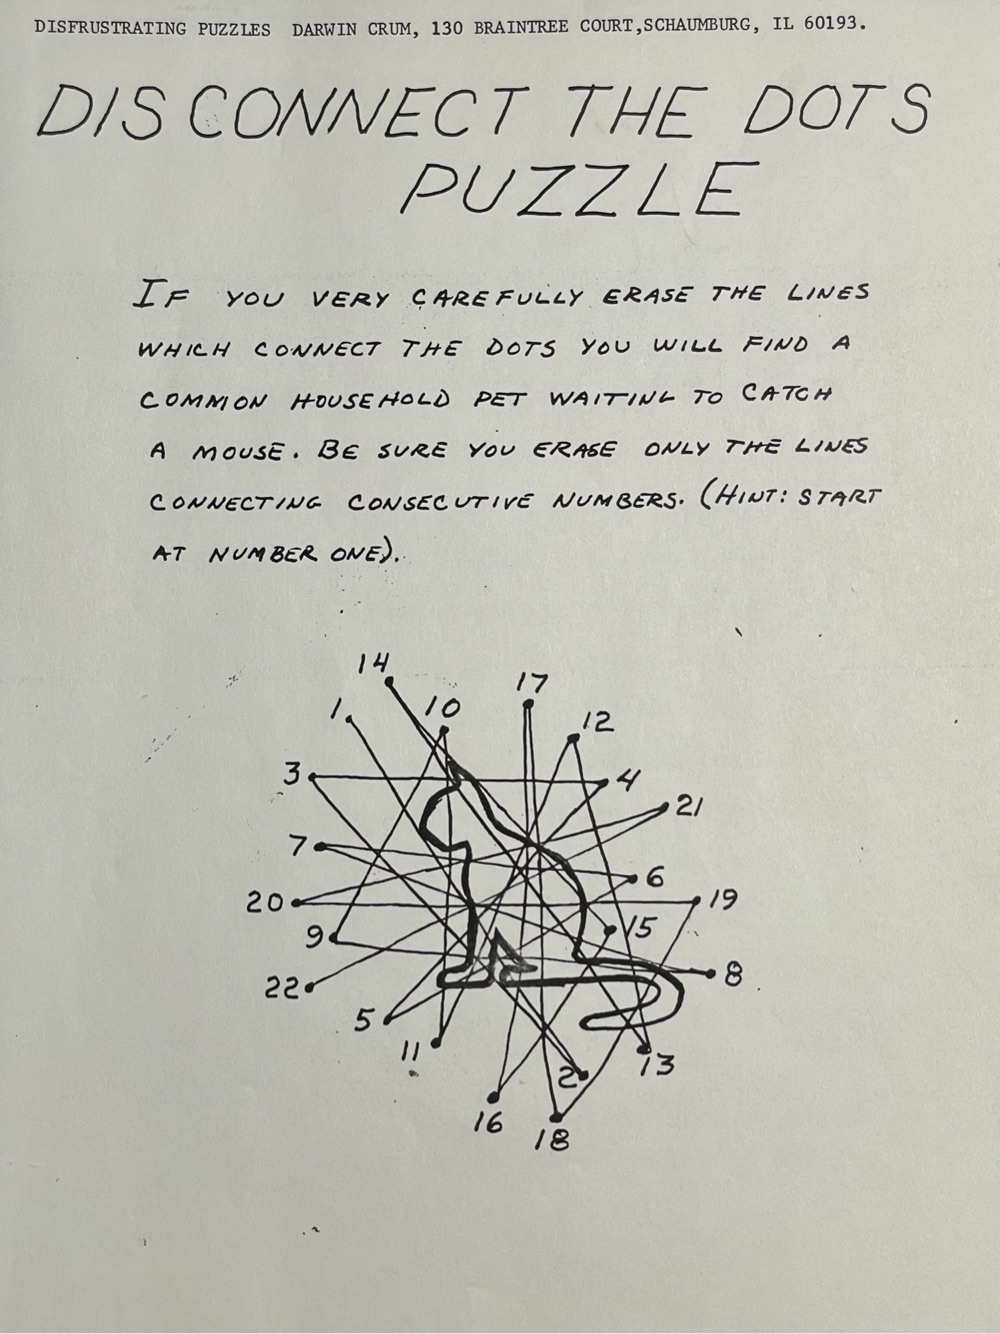 a disconnect the dots puzzle